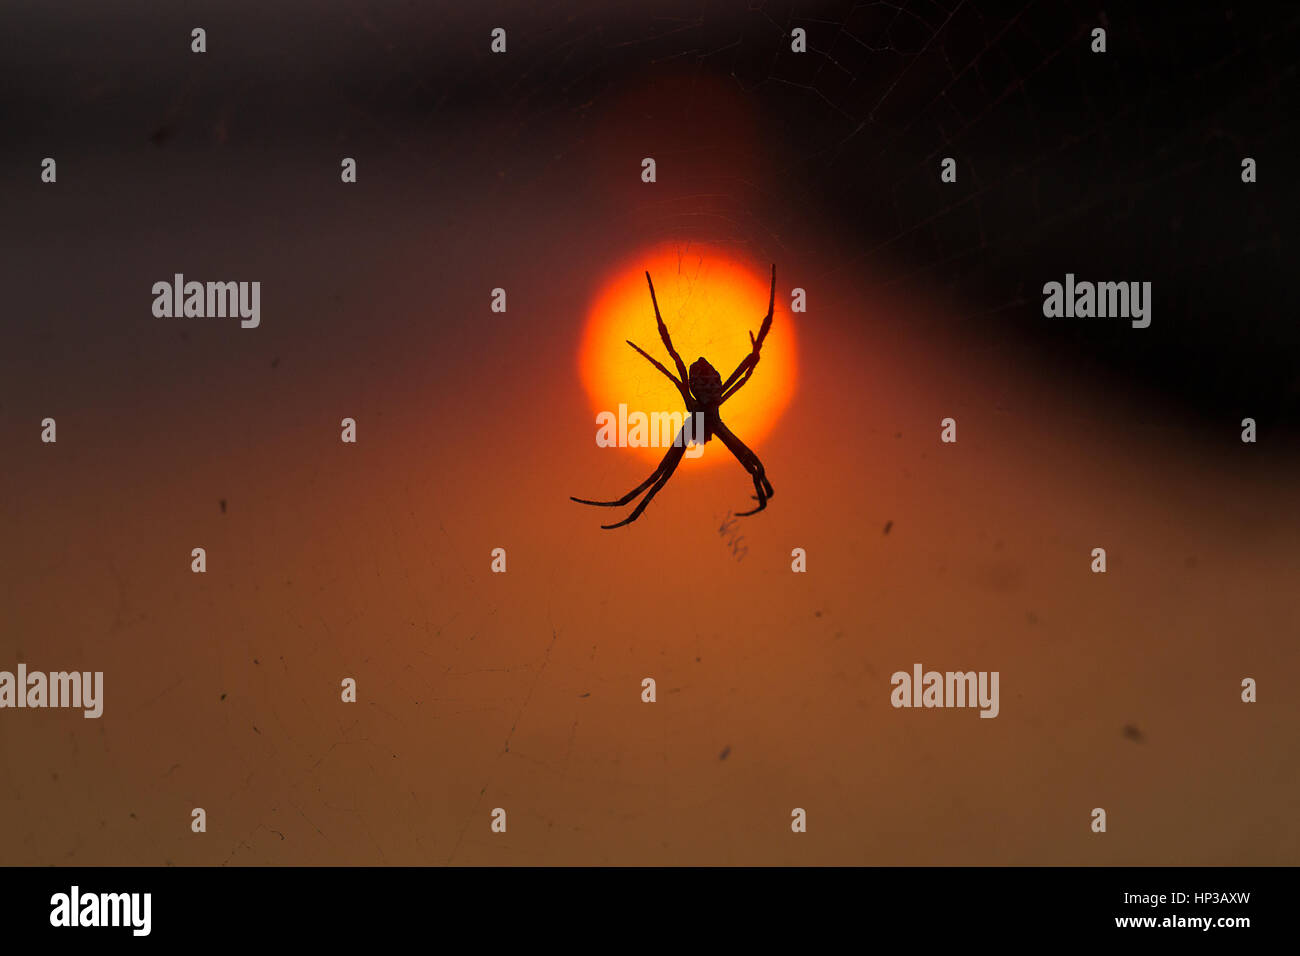 A close-up of the signature spider against setting sun at evening, composed in the middle of the sun Stock Photo